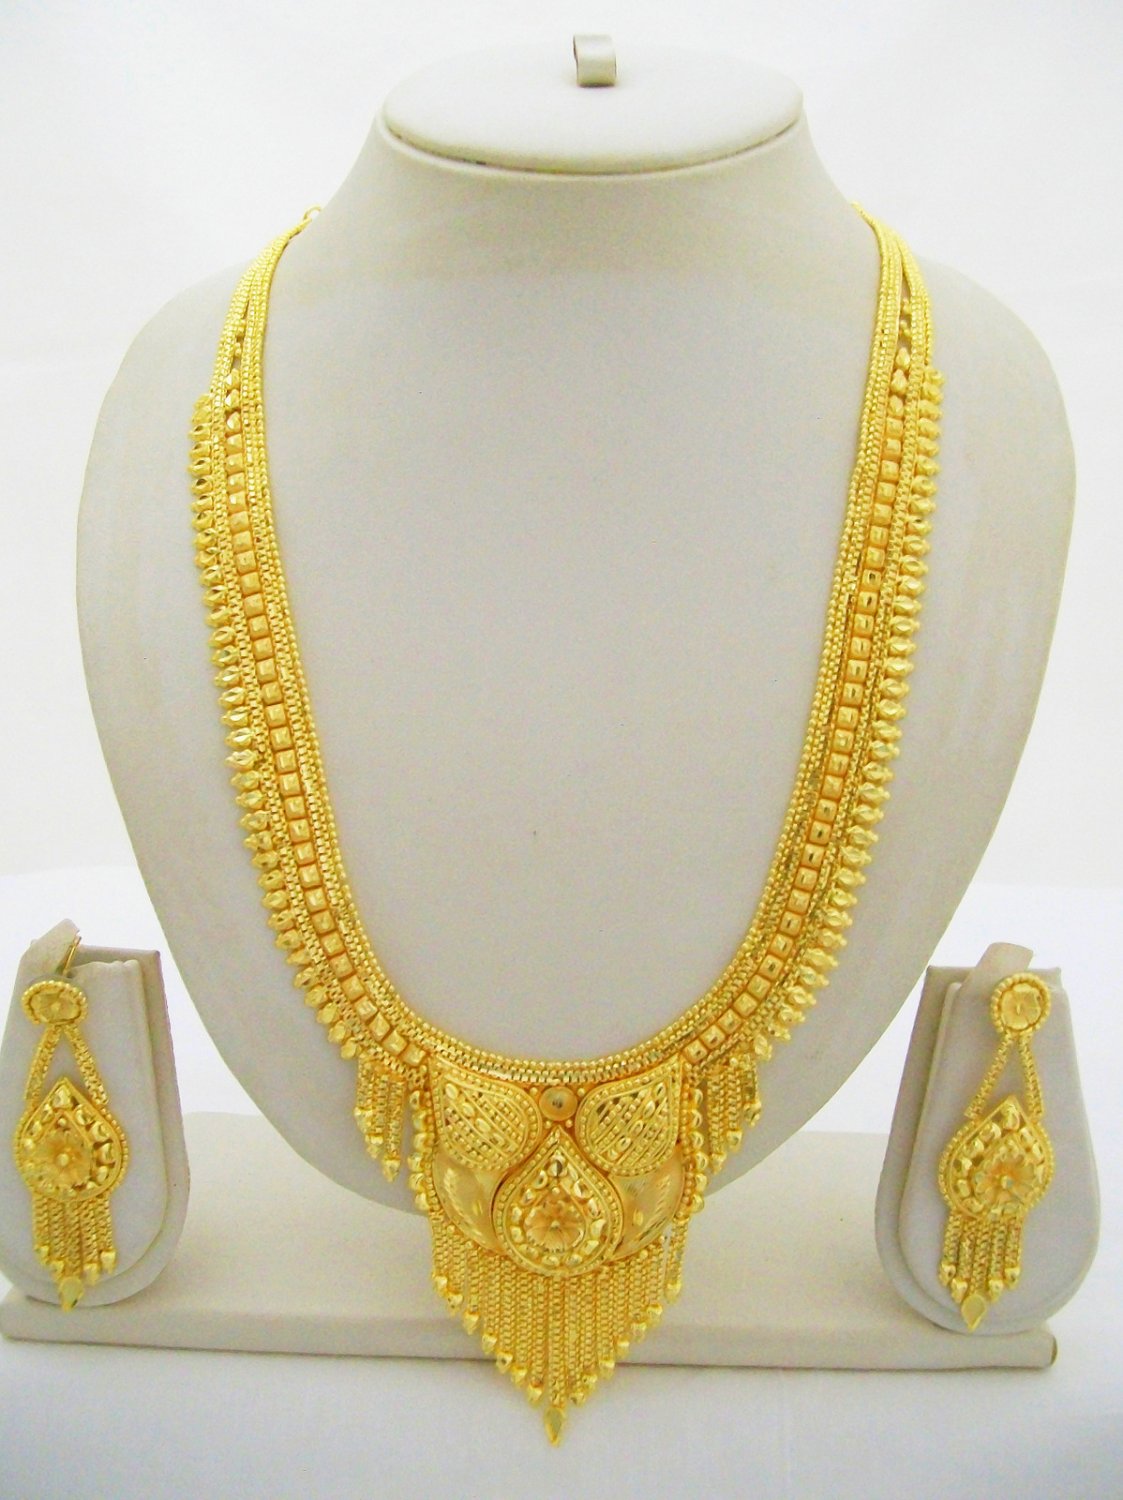 Rani Haar Gold Plated Necklace Bollywood Fashion Indian Filigree Long Jewelry Set